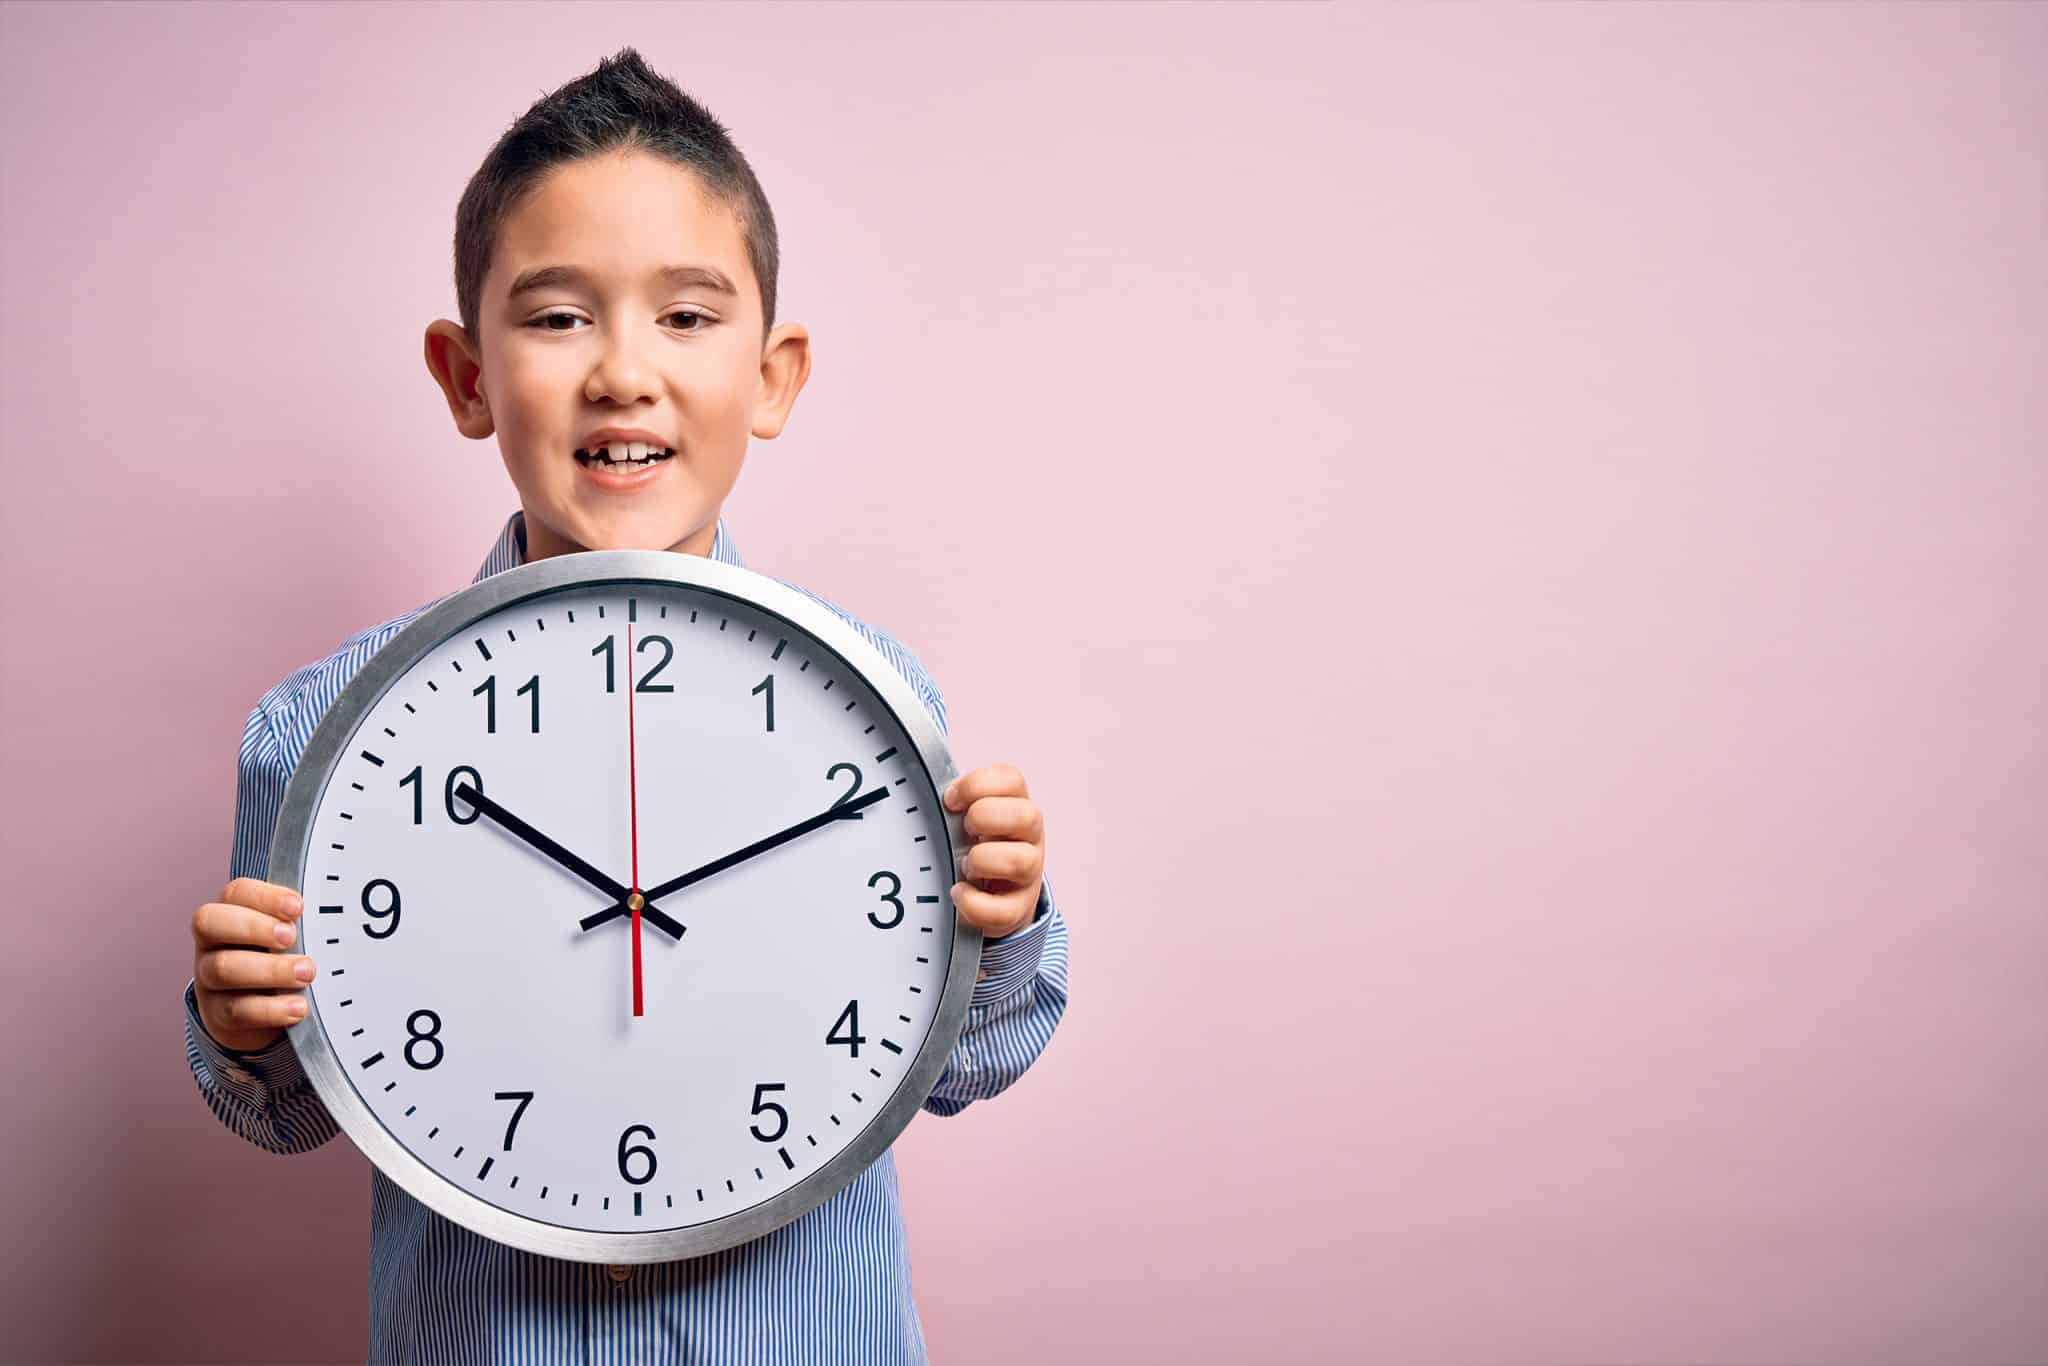 a little boy holding up a large analog clock